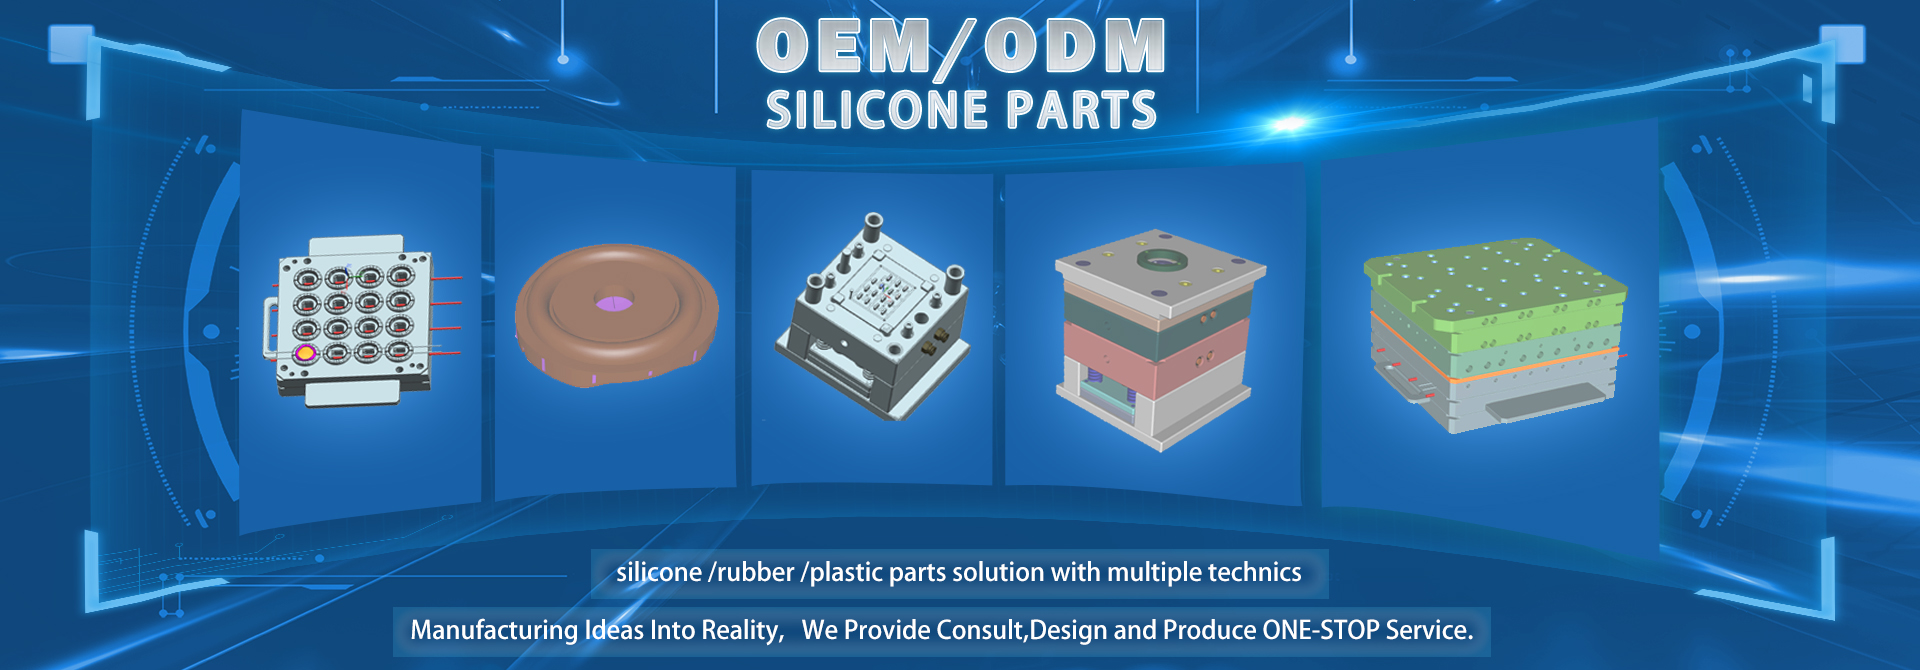 OEMODMsilicone parts